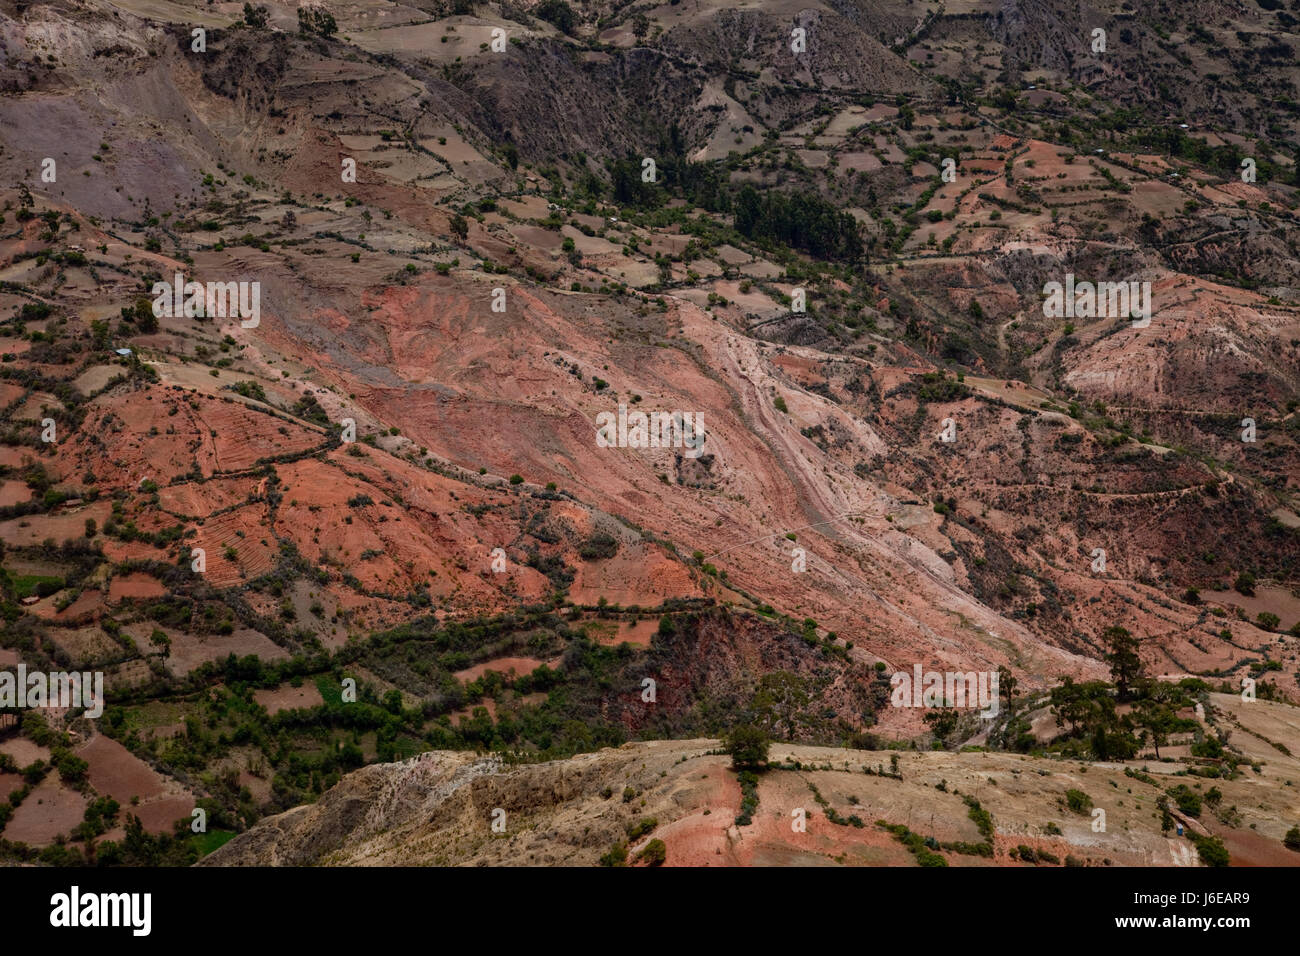 mountains highland landslide peru natural disaster andes scenery countryside Stock Photo